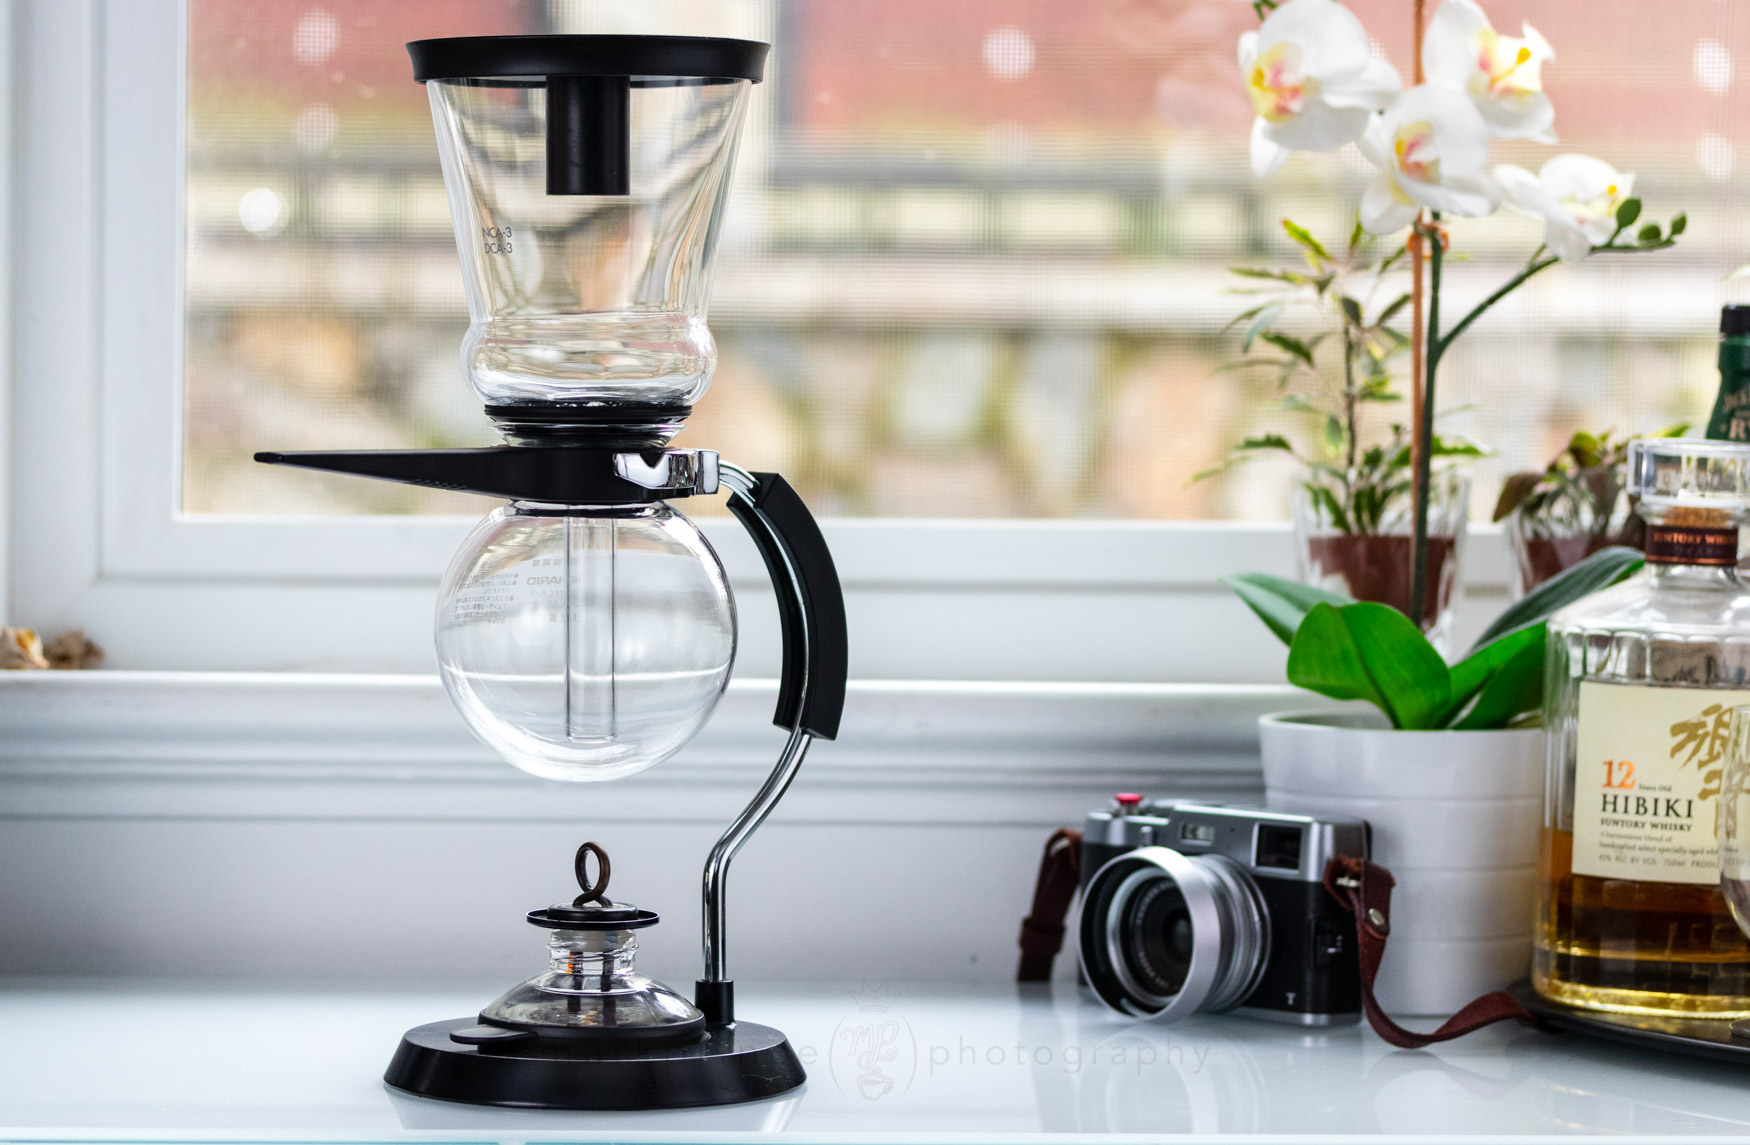 Hario Nouveau Siphon Coffee Brewer Full Review - CoffeeGeek